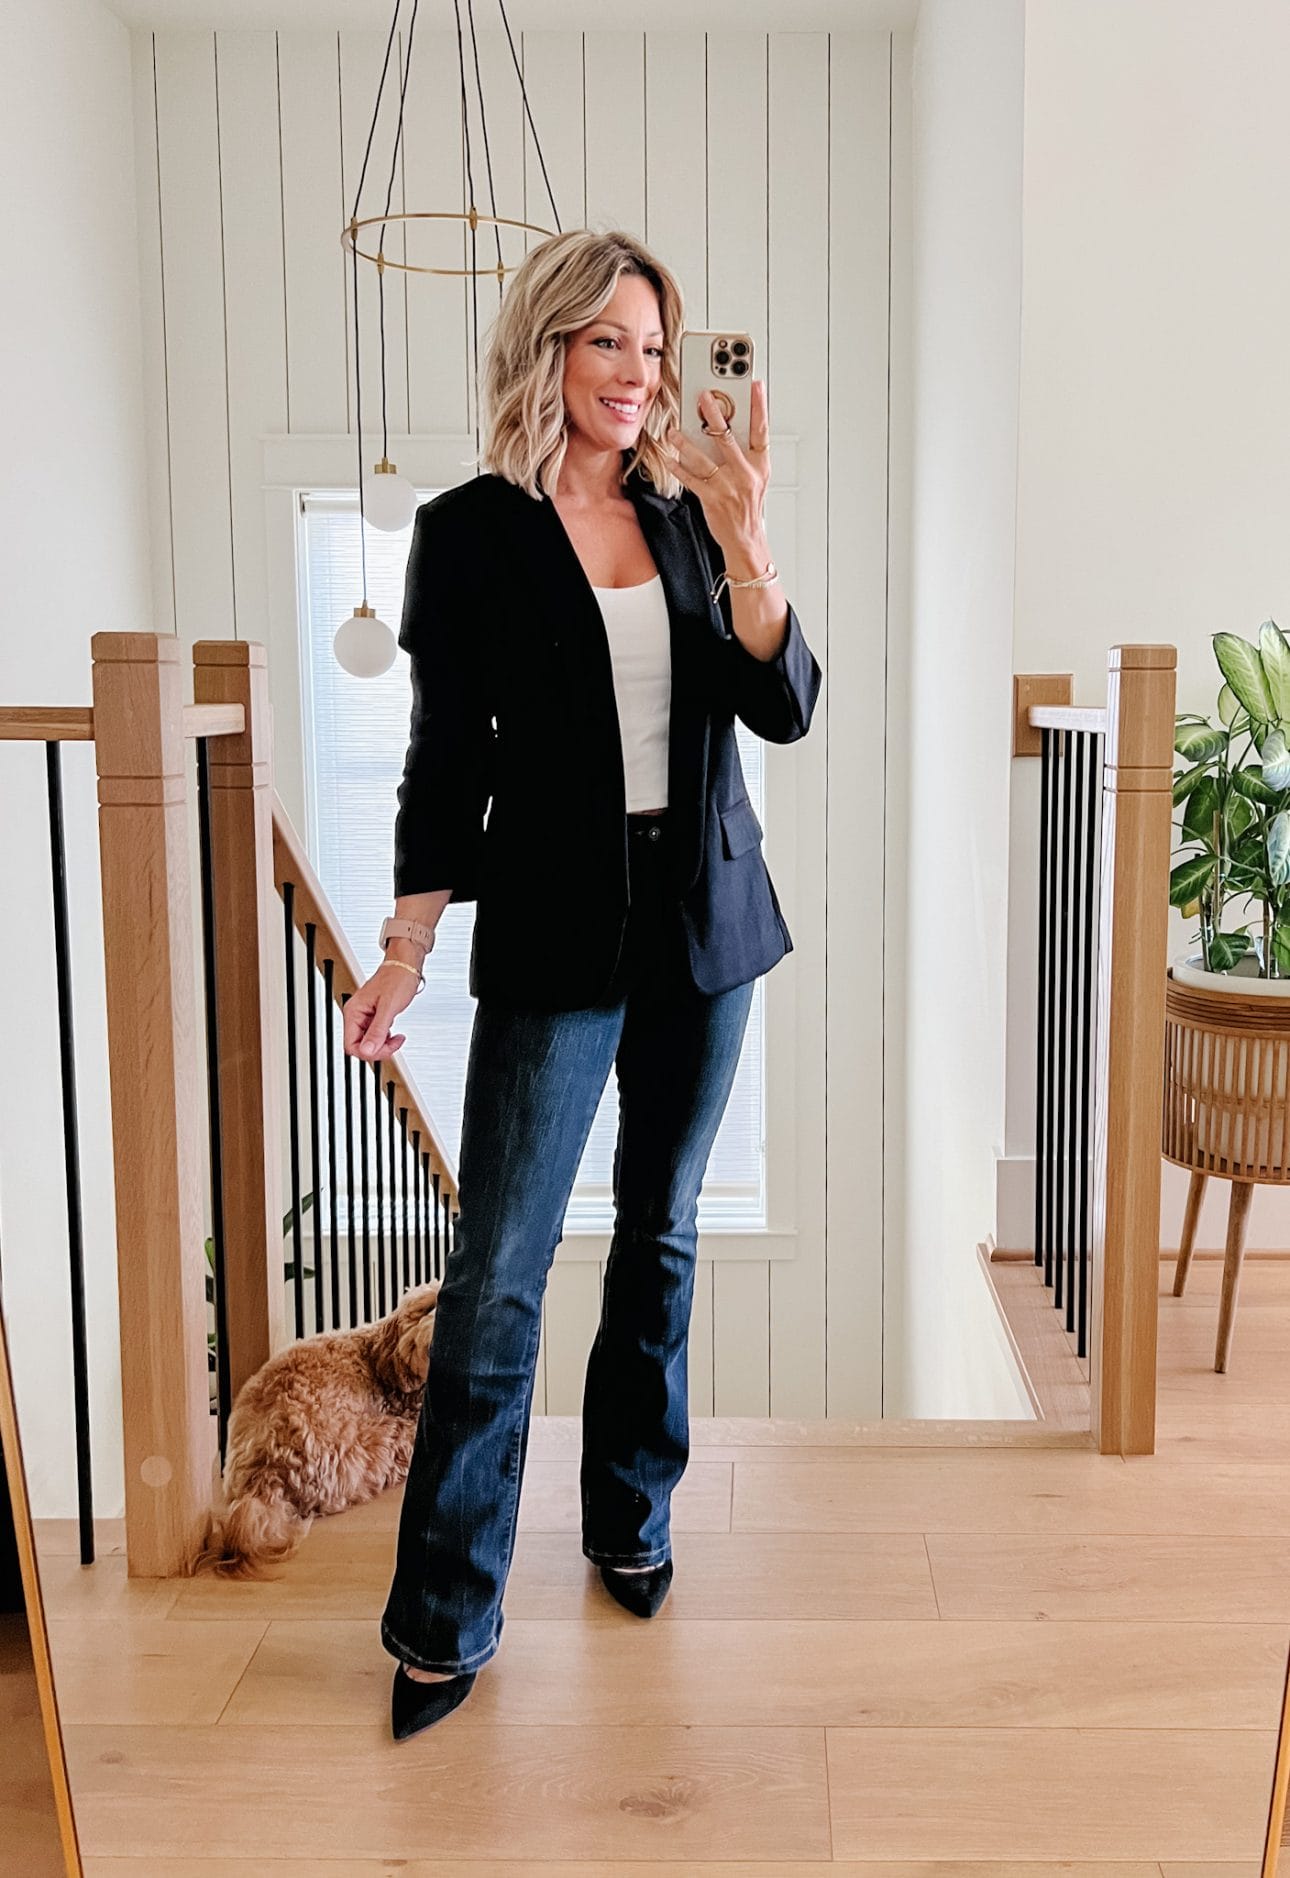 Walmart rusched sleeve blazer and jeans outfit